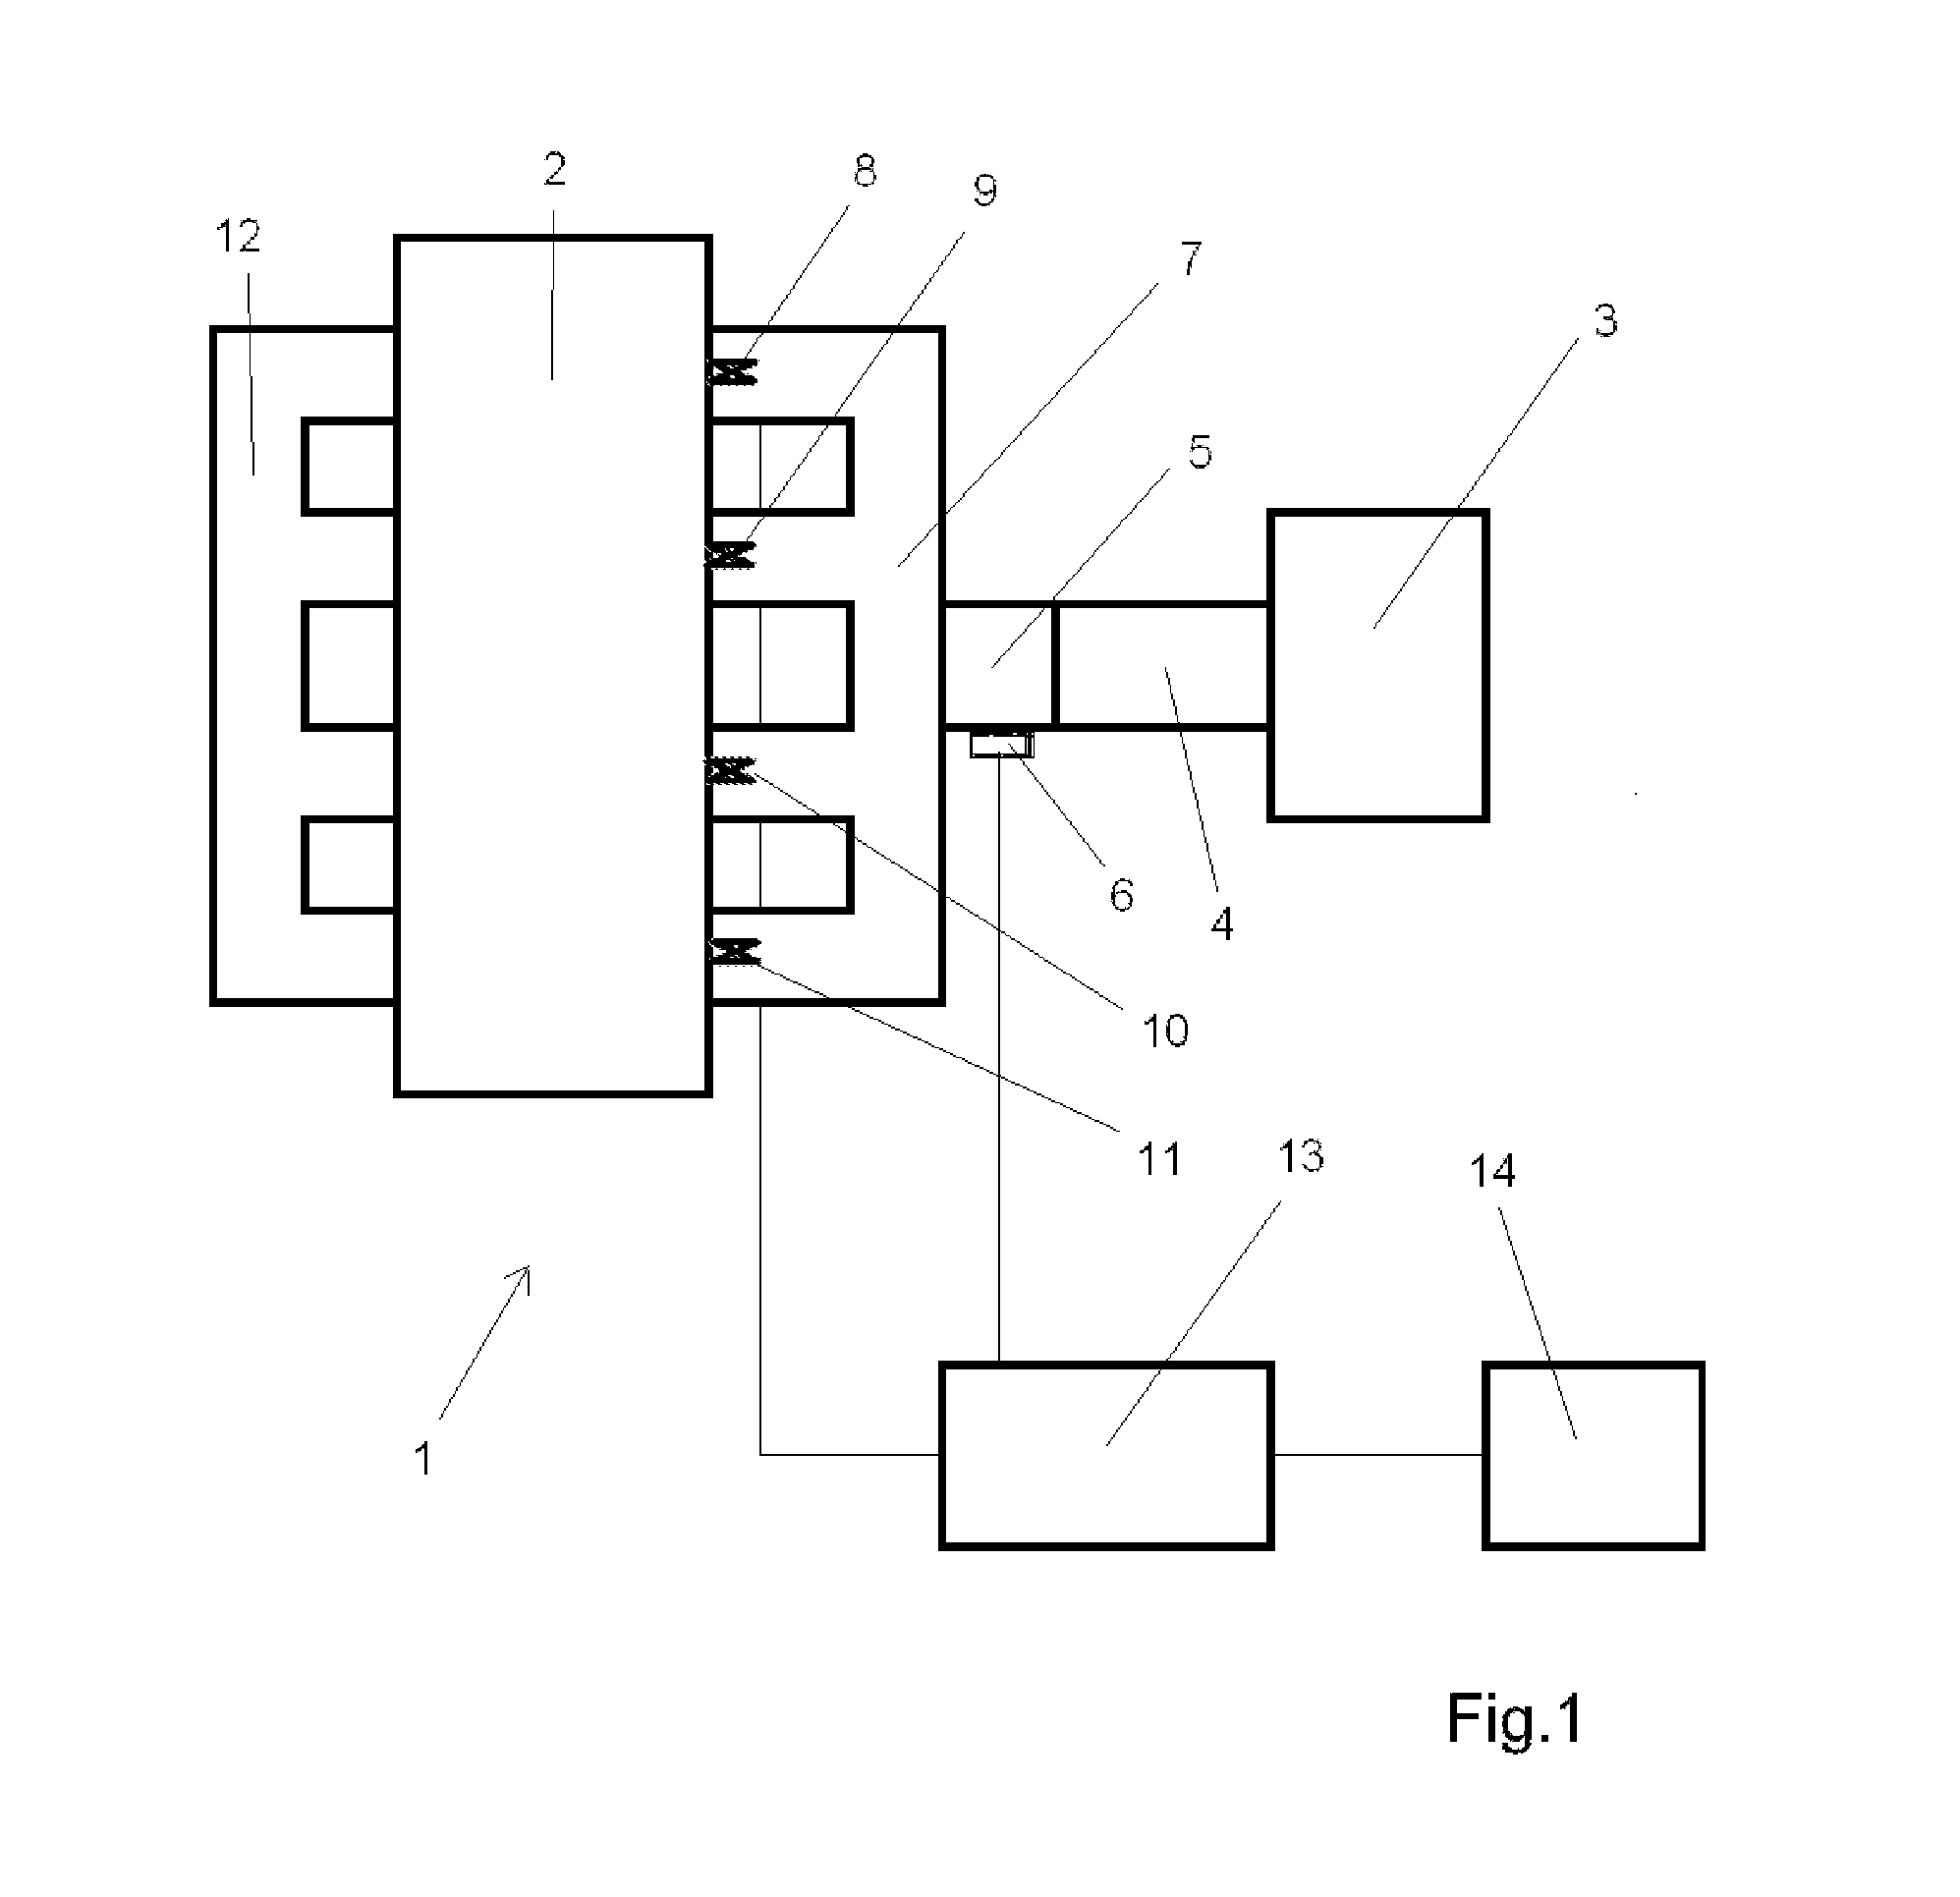 Throttle valve controller for an internal combustion engine